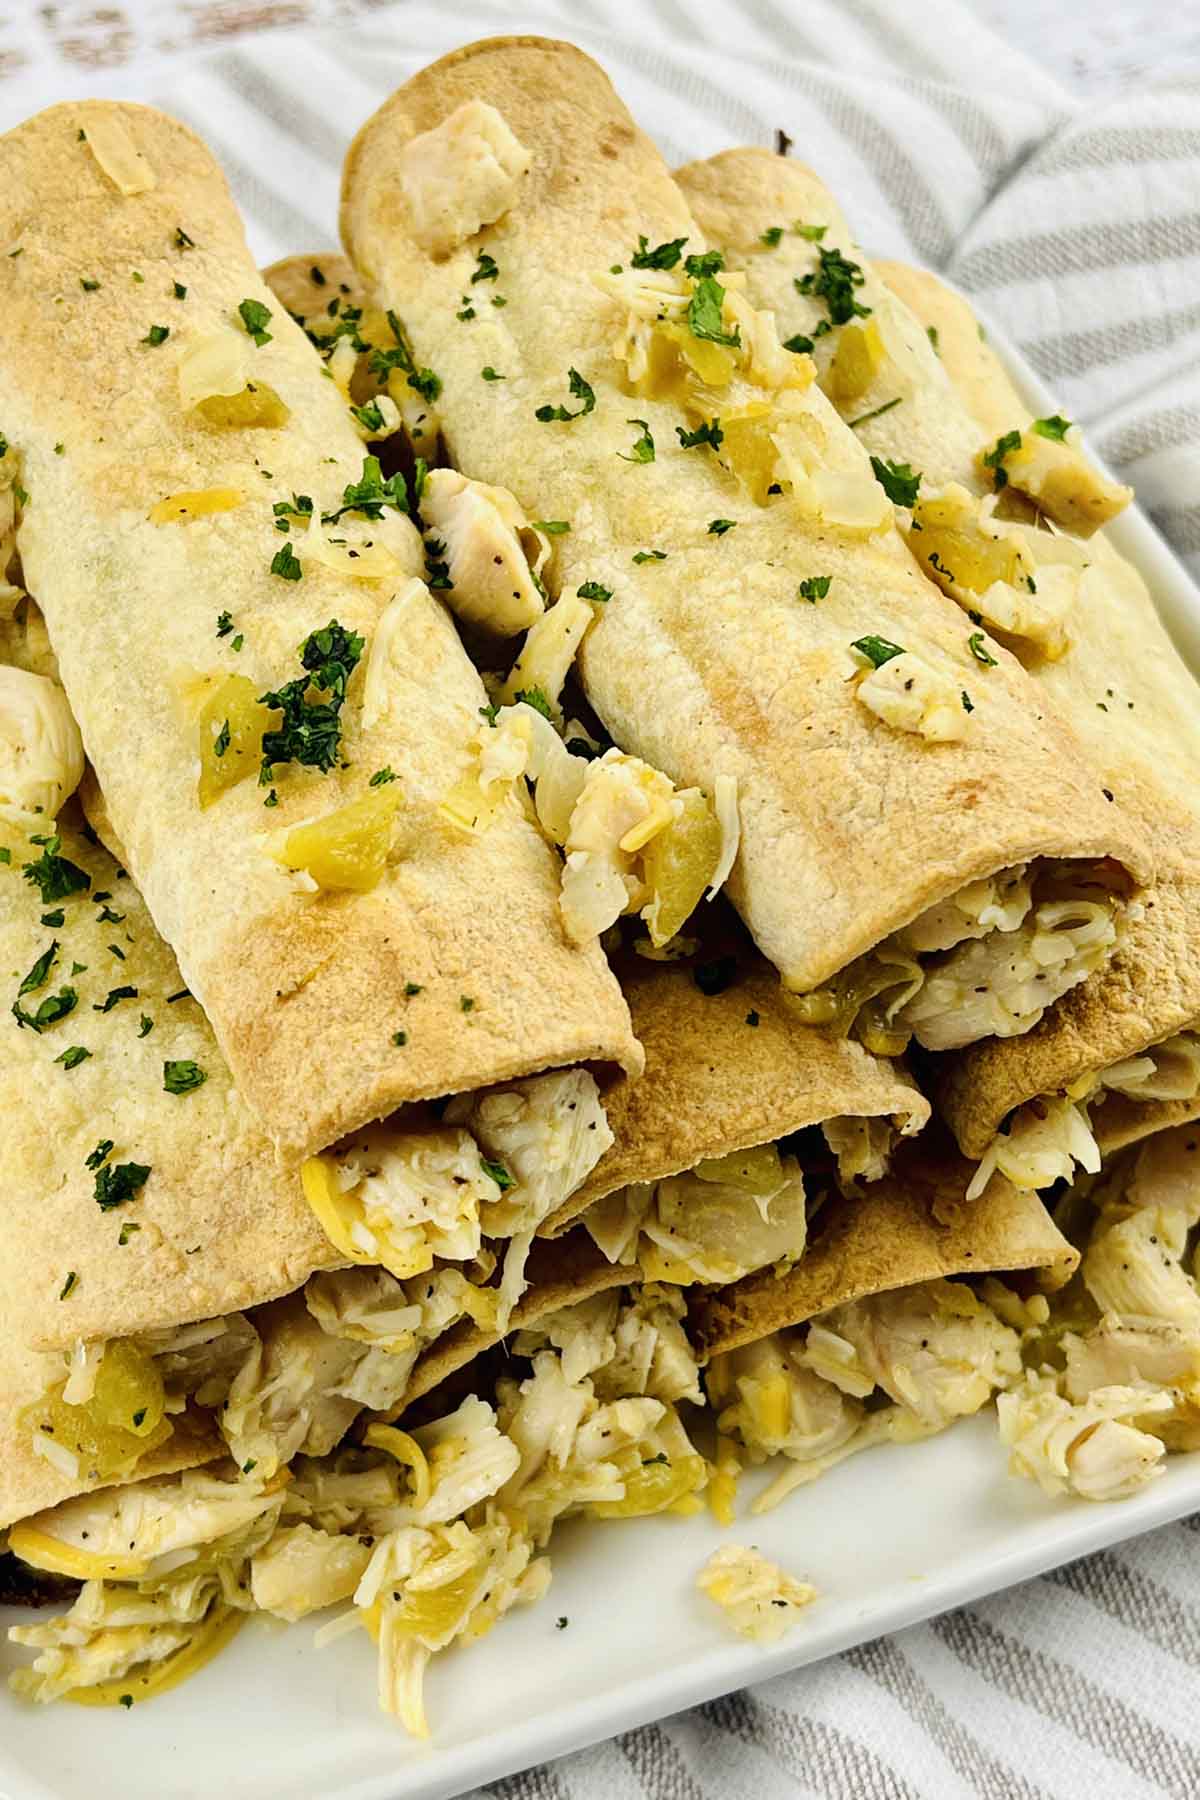 Taquitos stacked on a plate and sprinkled with chopped parsley.